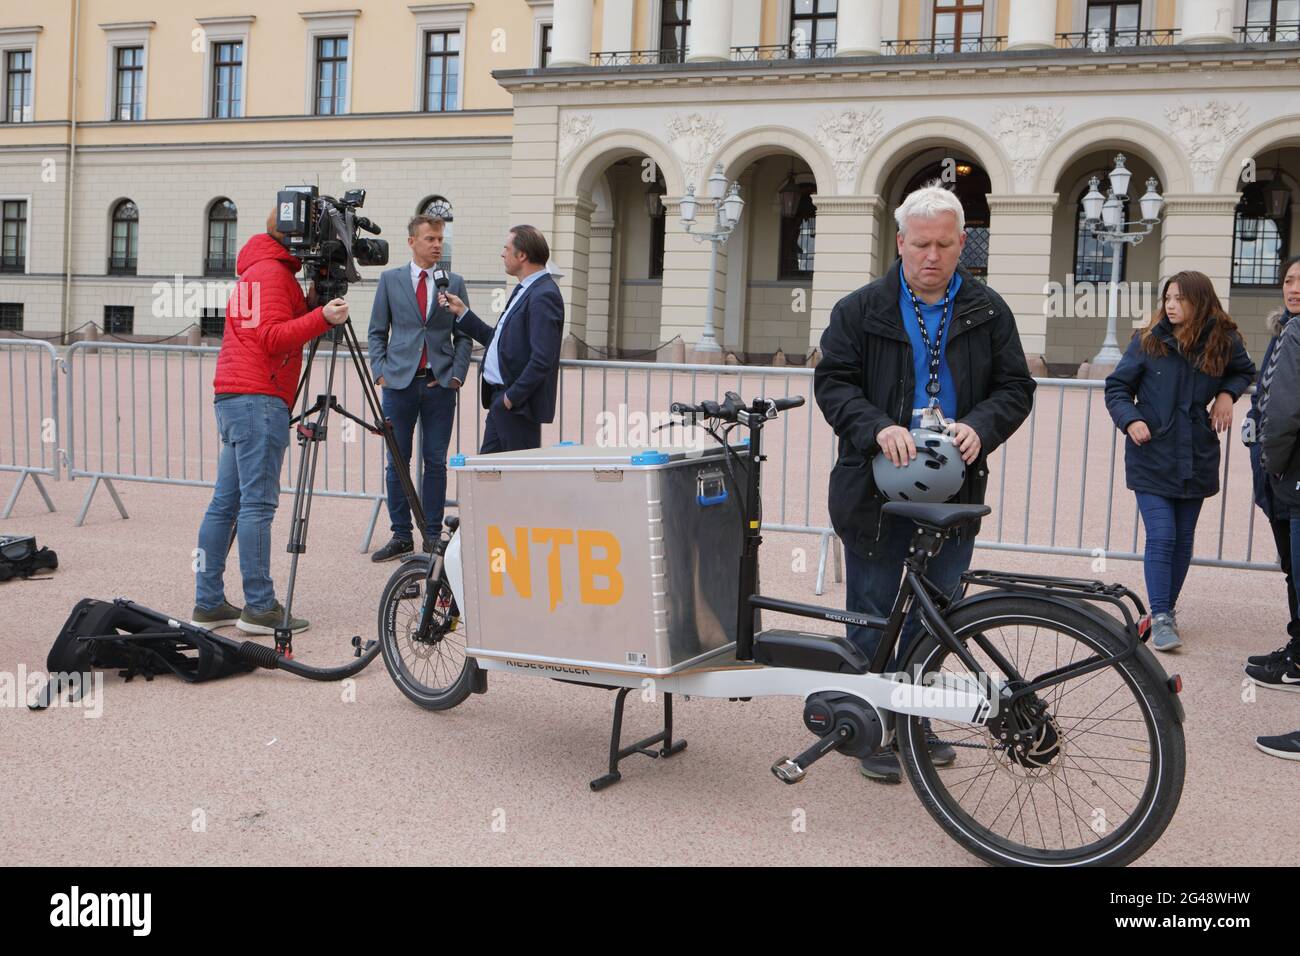 Journalists of NTB, the Norwegian News Agency make a reportage at the Royal Palace in Oslo, Norway Stock Photo